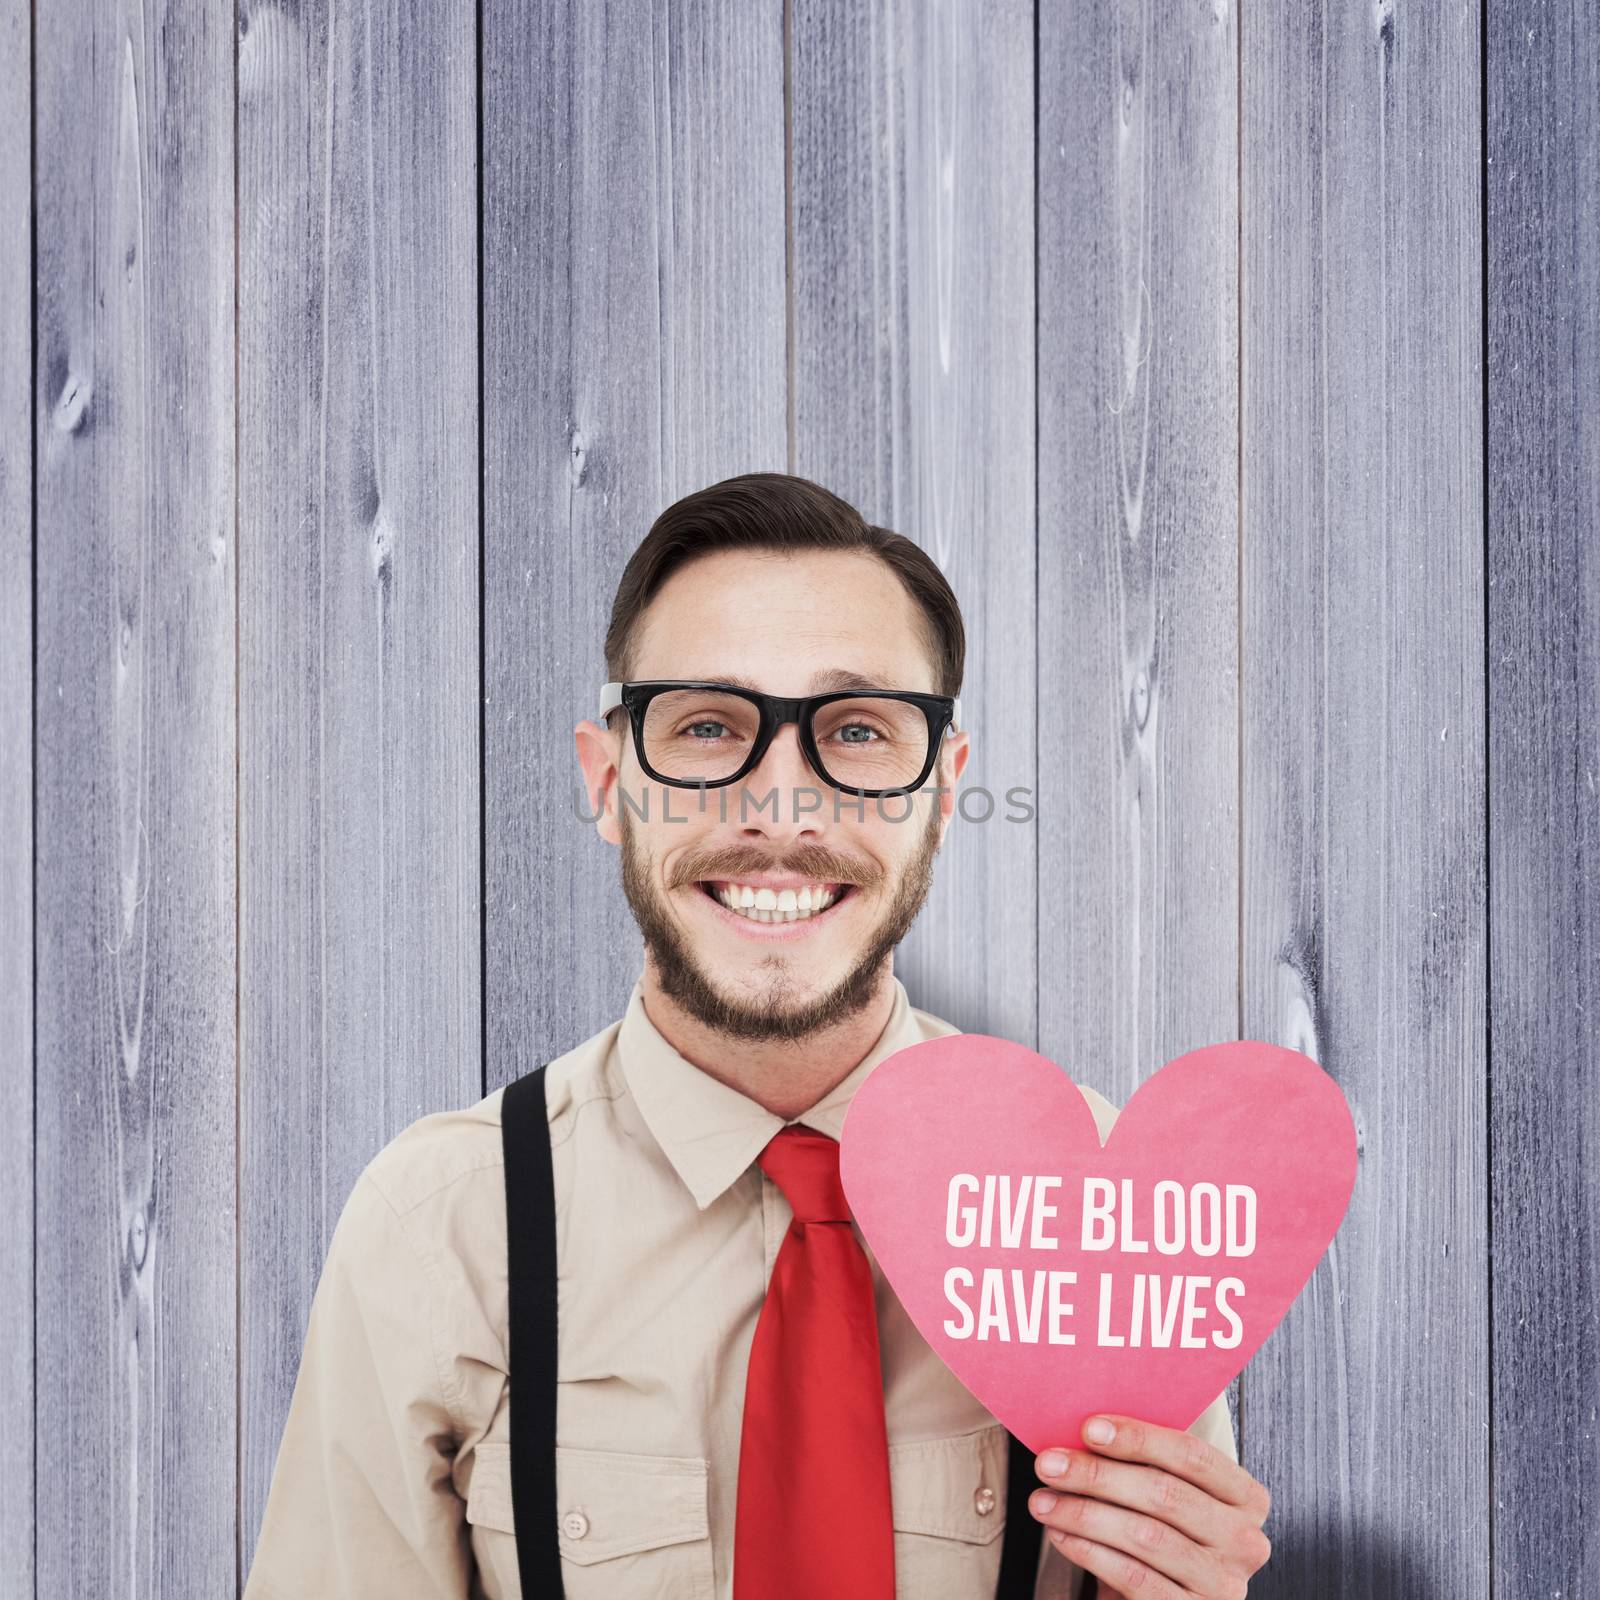 Geeky hipster smiling and holding heart card against wooden planks